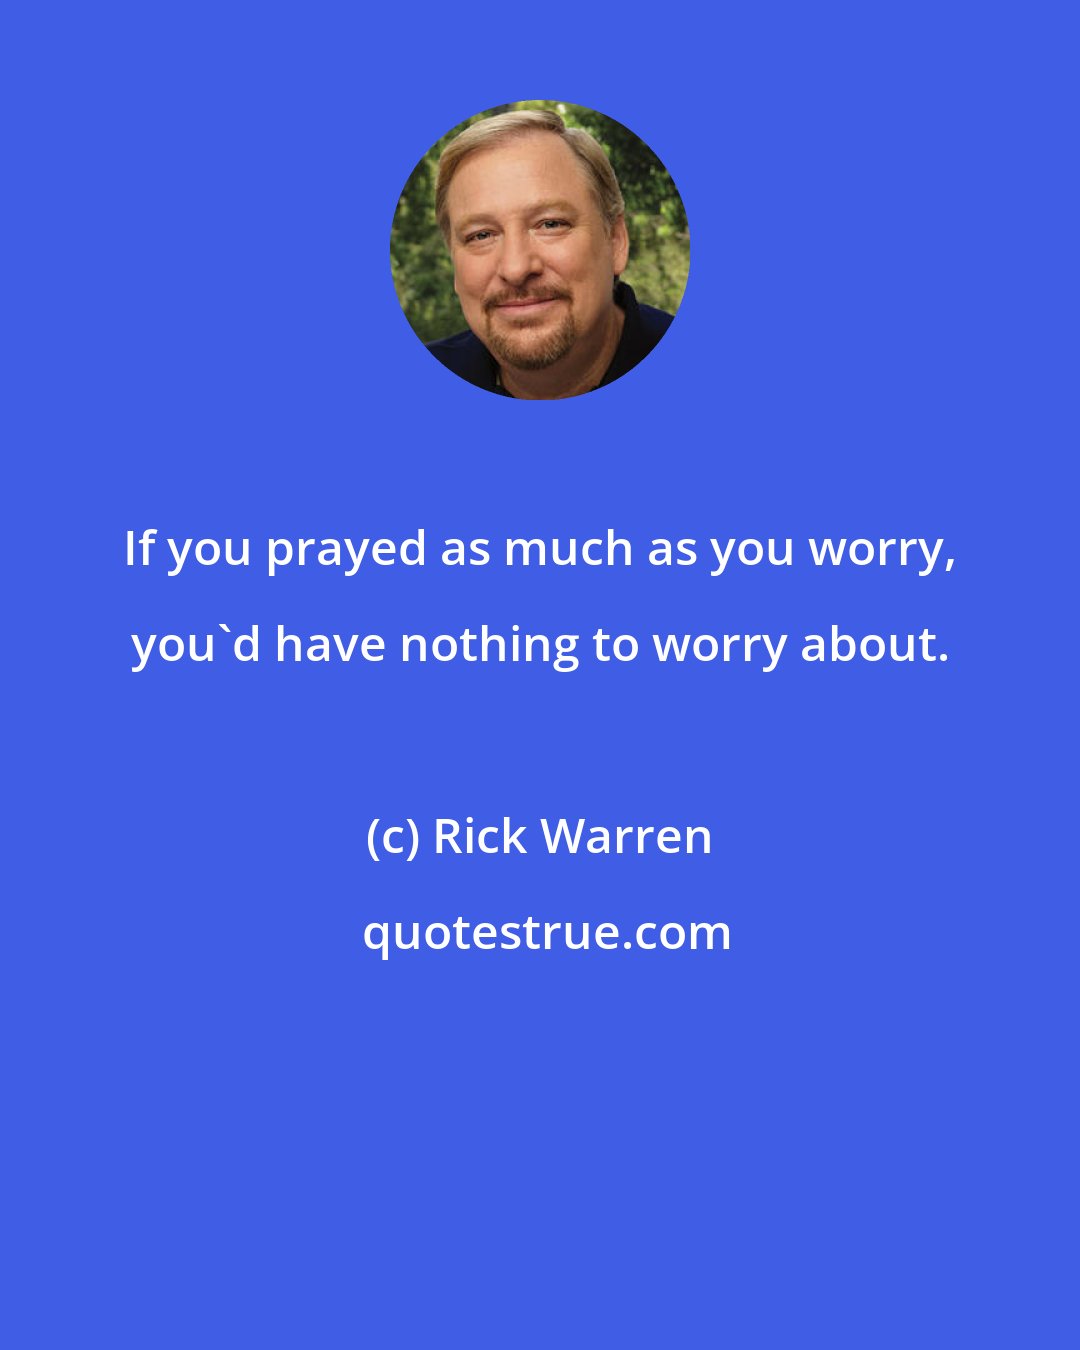 Rick Warren: If you prayed as much as you worry, you'd have nothing to worry about.